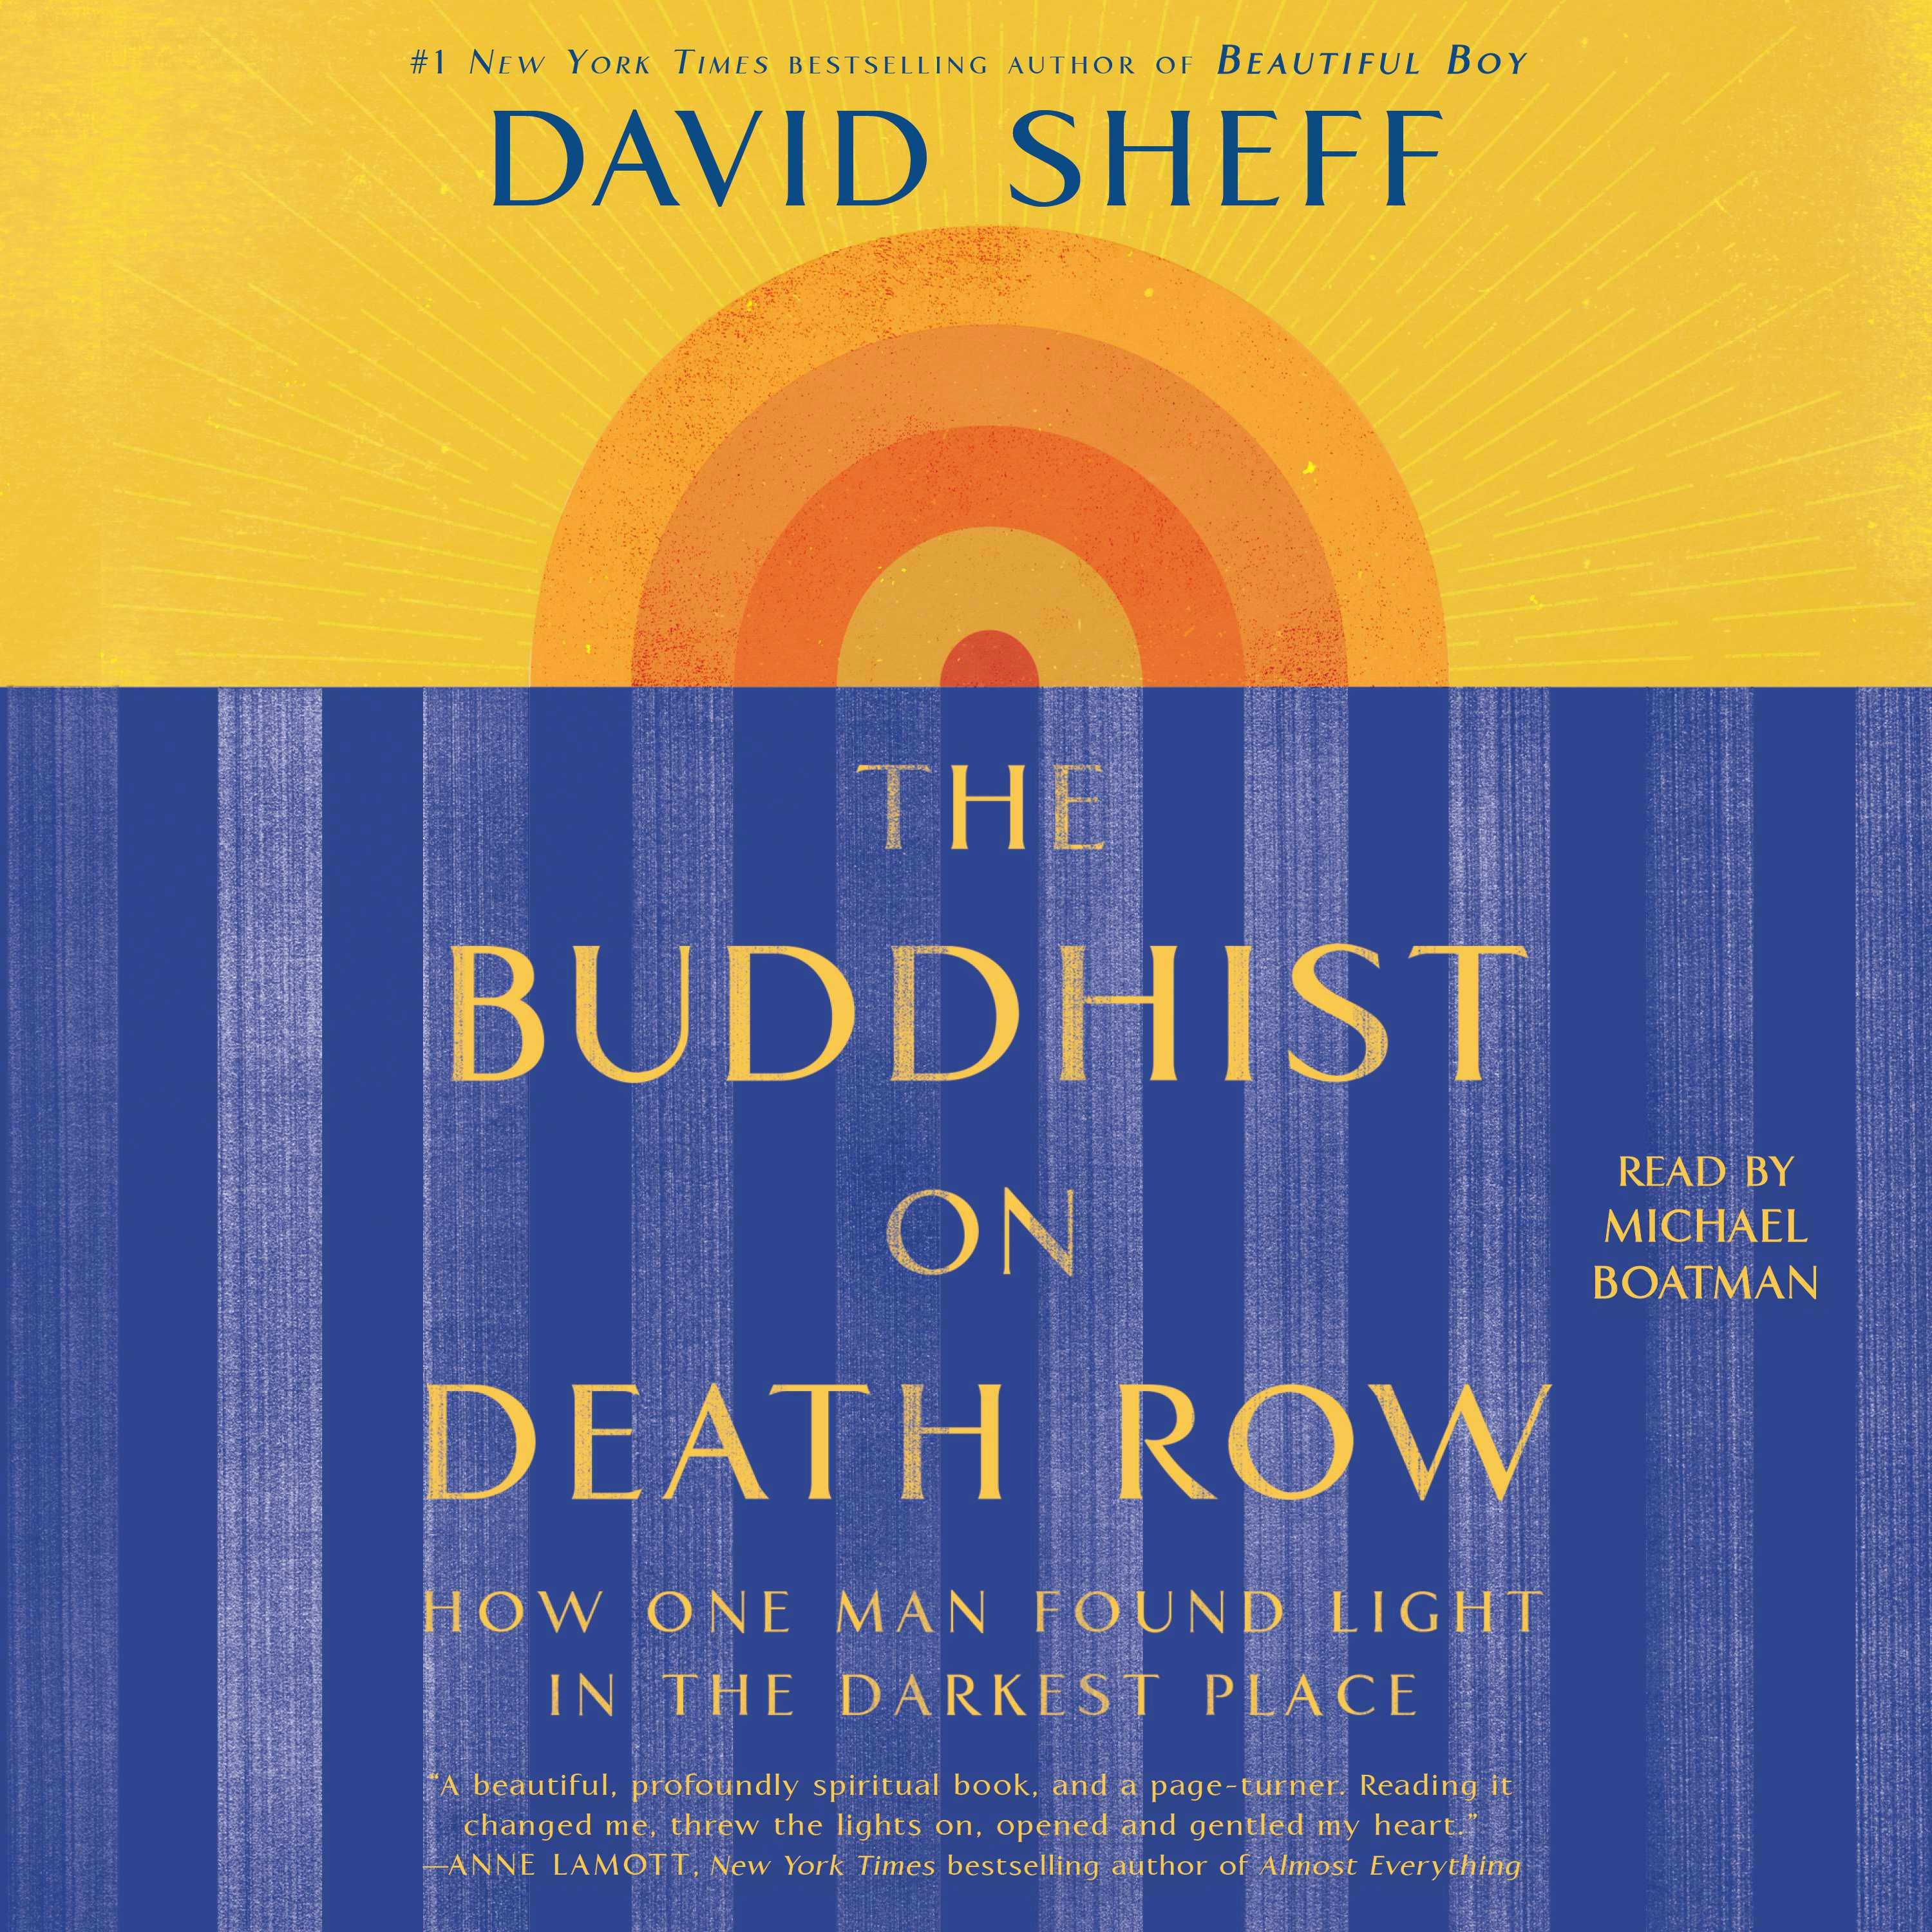 The Buddhist on Death Row: How One Man Found Light in the Darkest Place - David Sheff